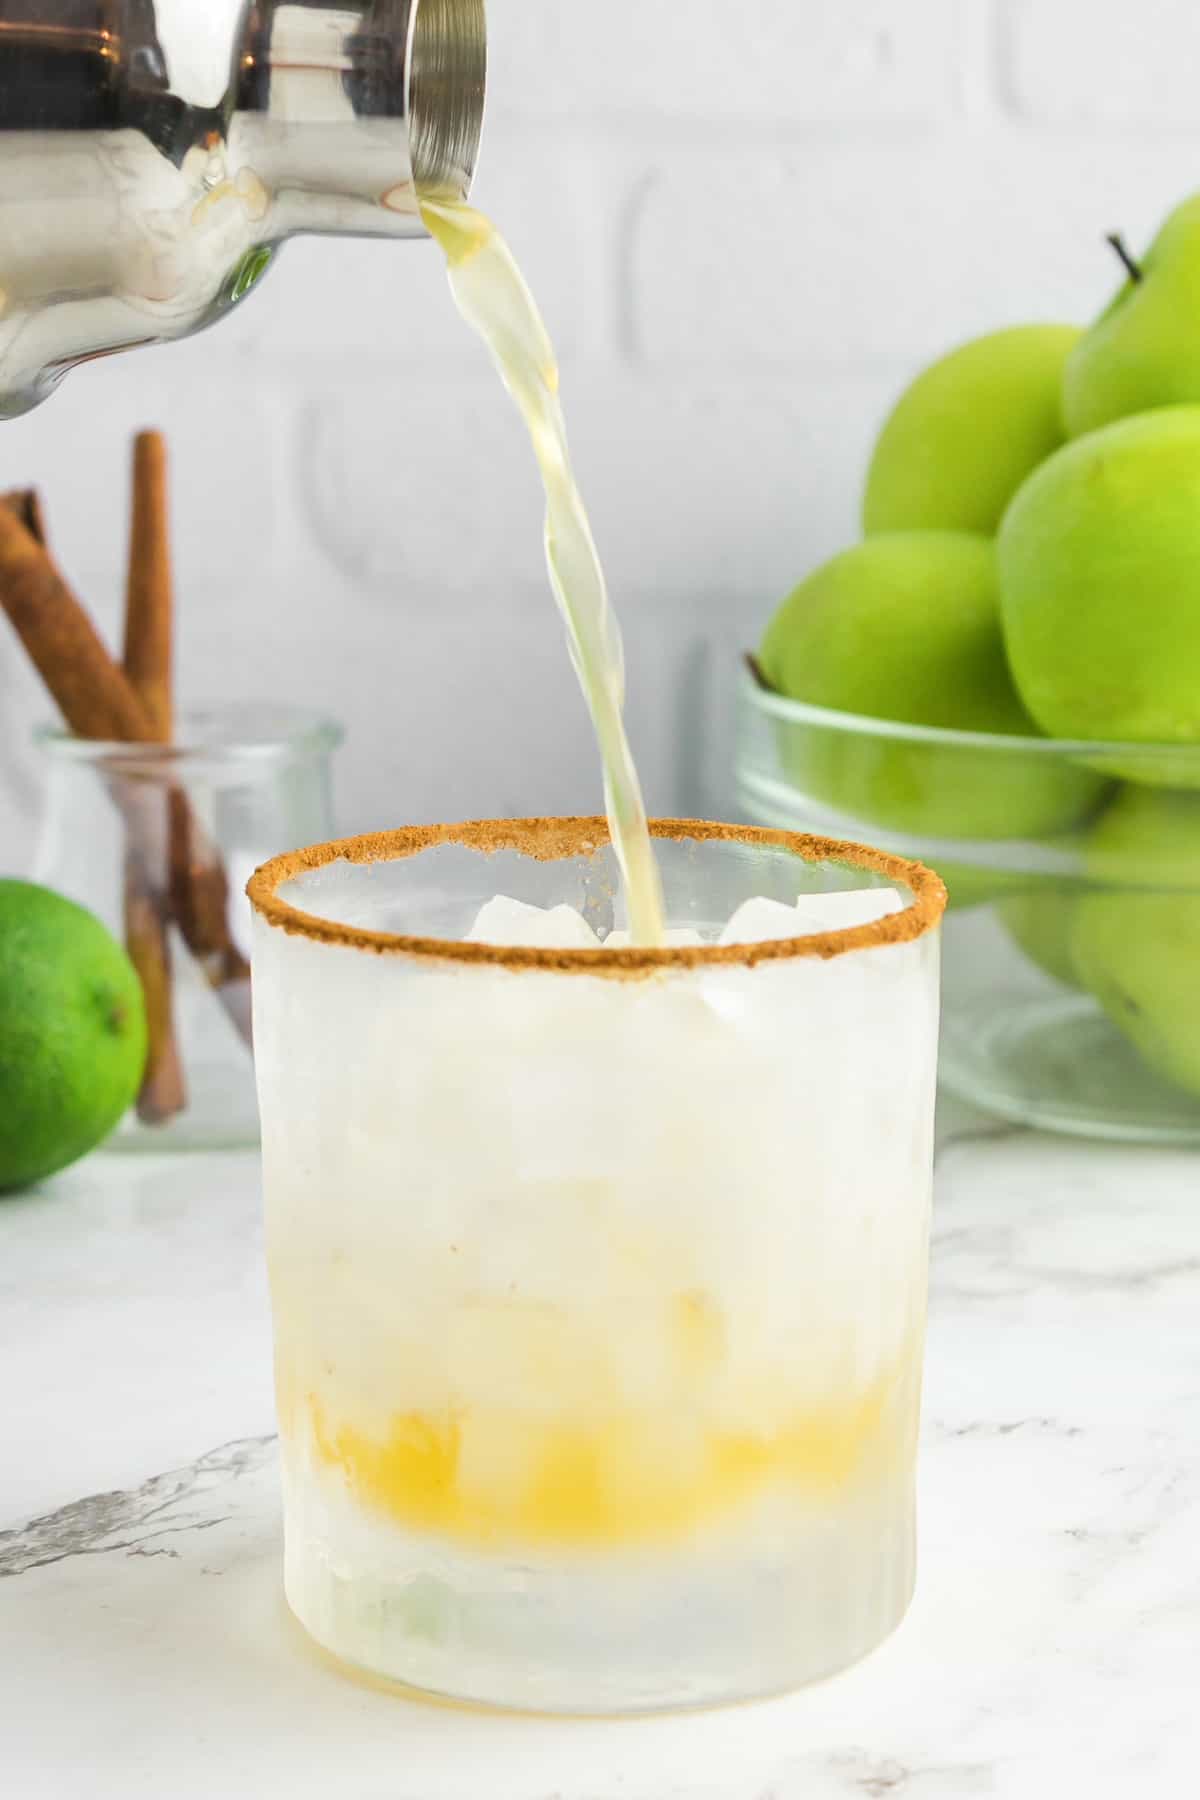 Apple cider margarita being poured into a glass with ice.